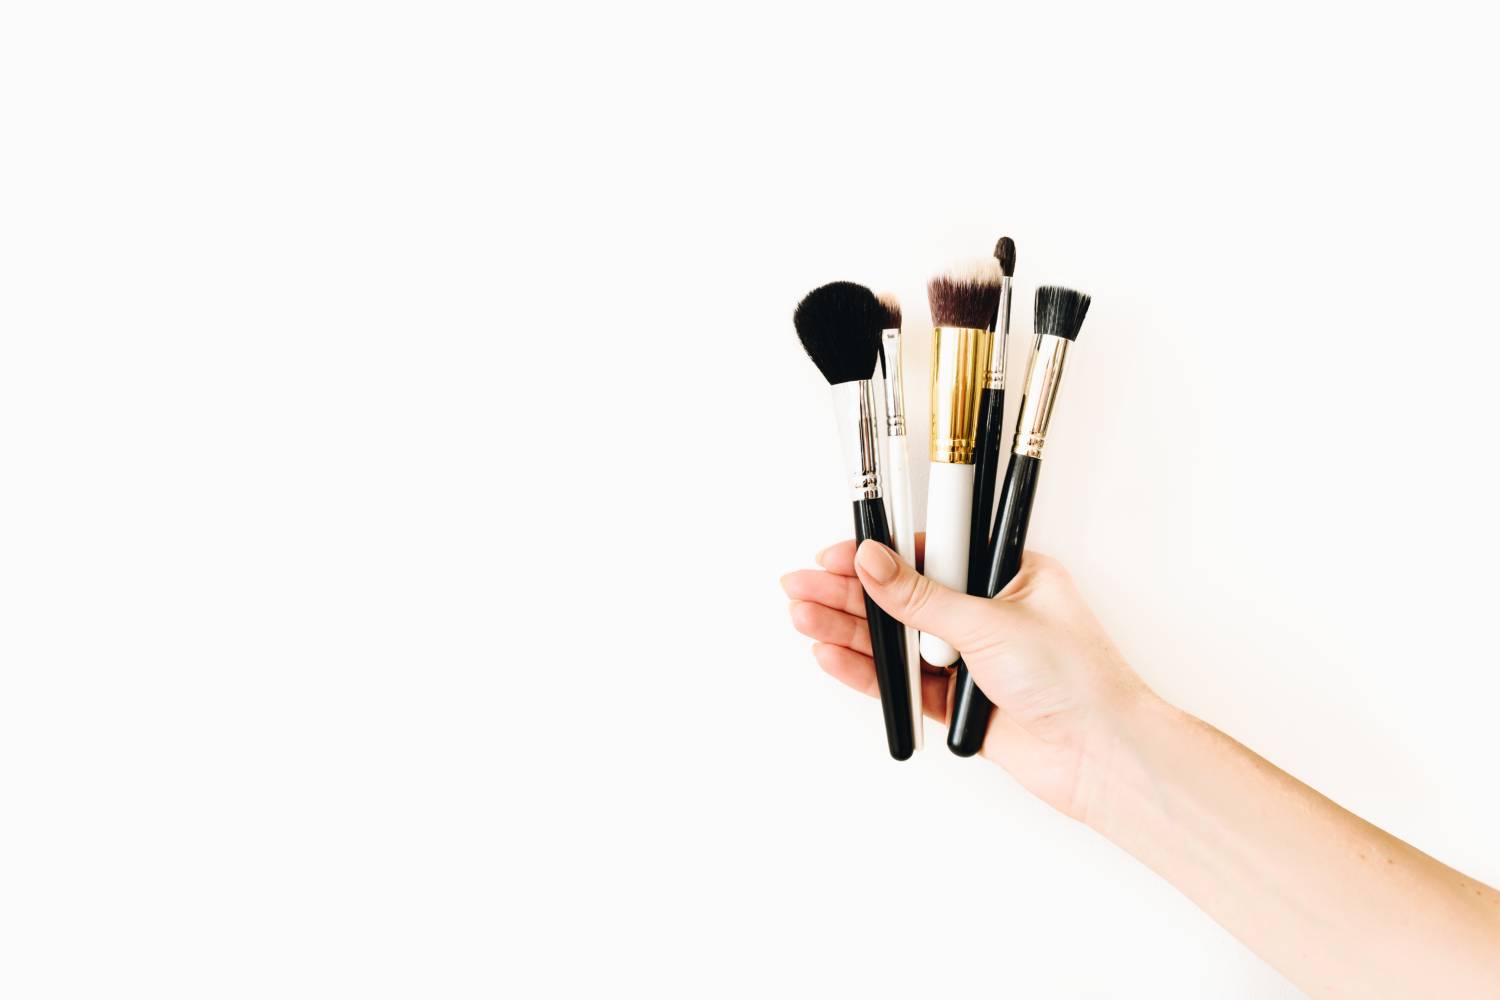 How To Clean Makeup Brushes Sponges